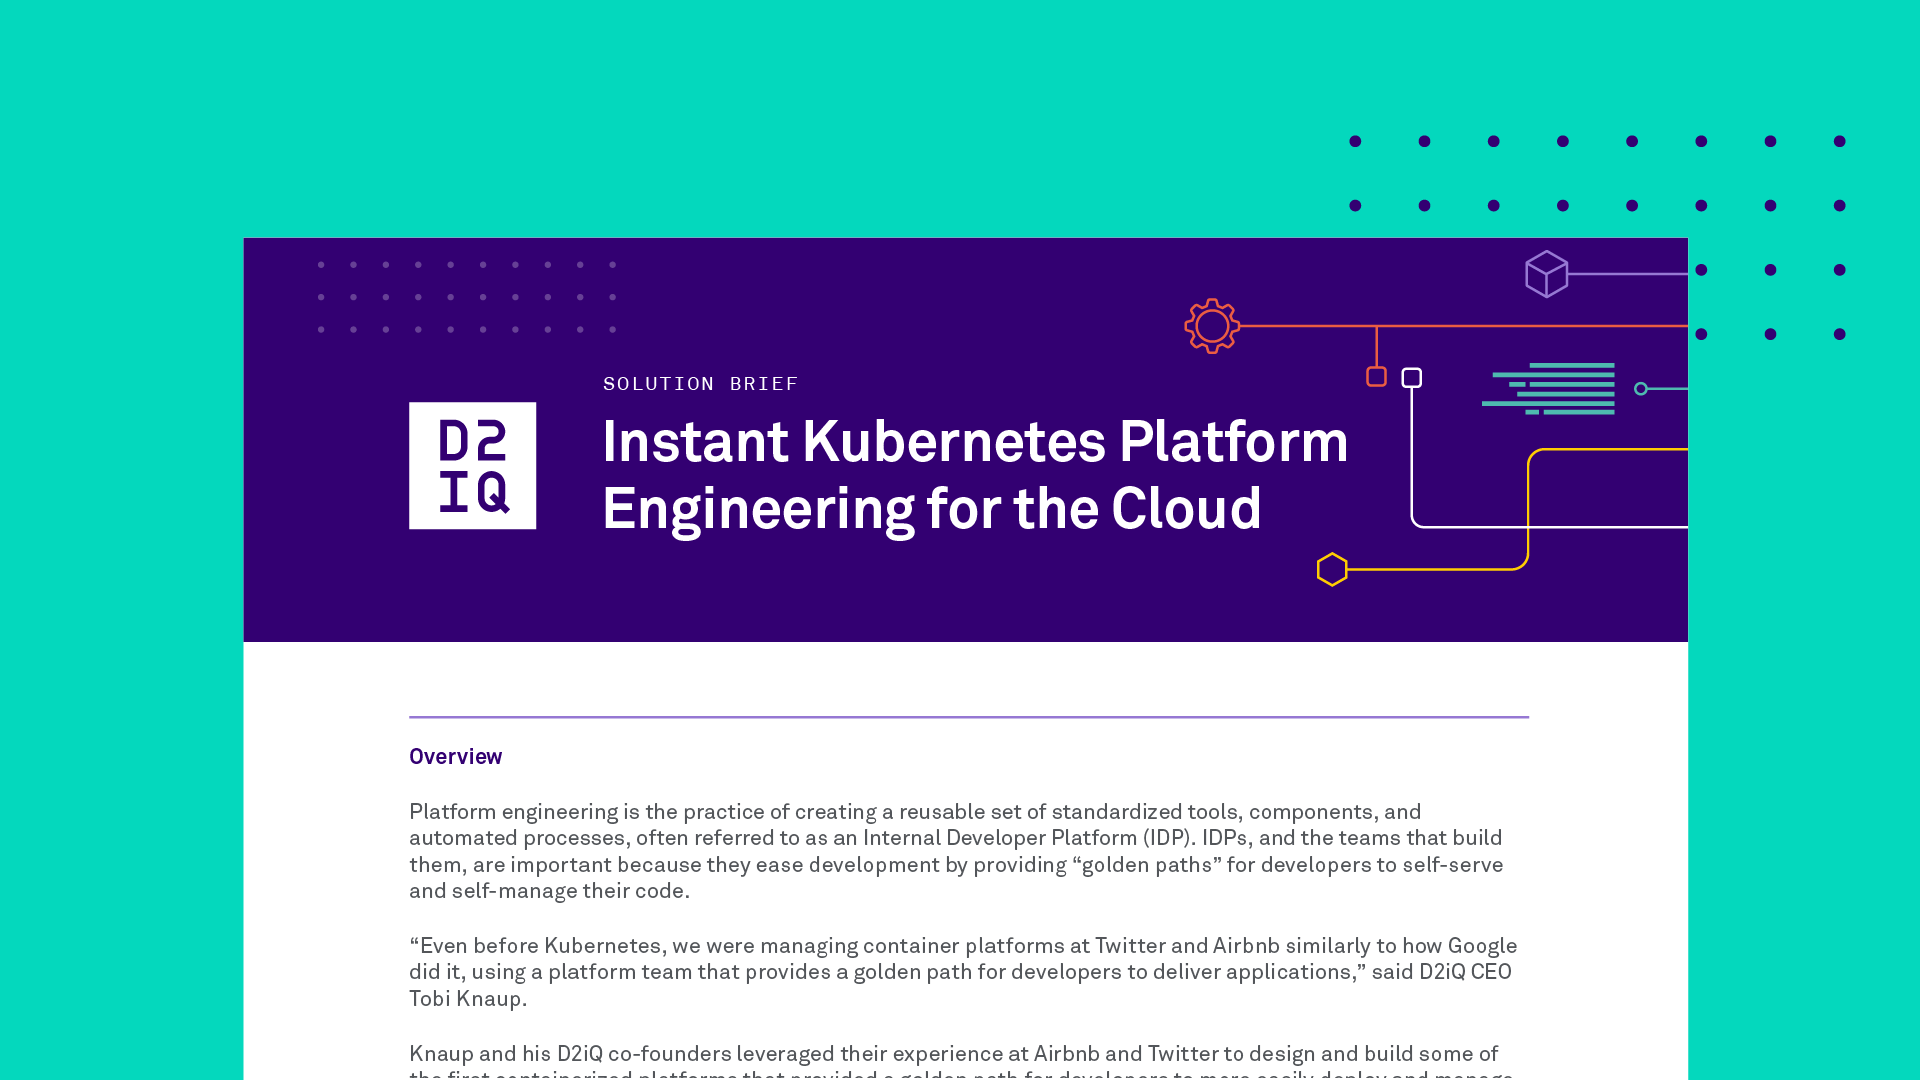 Instant Kubernetes Platform Engineering for the Cloud